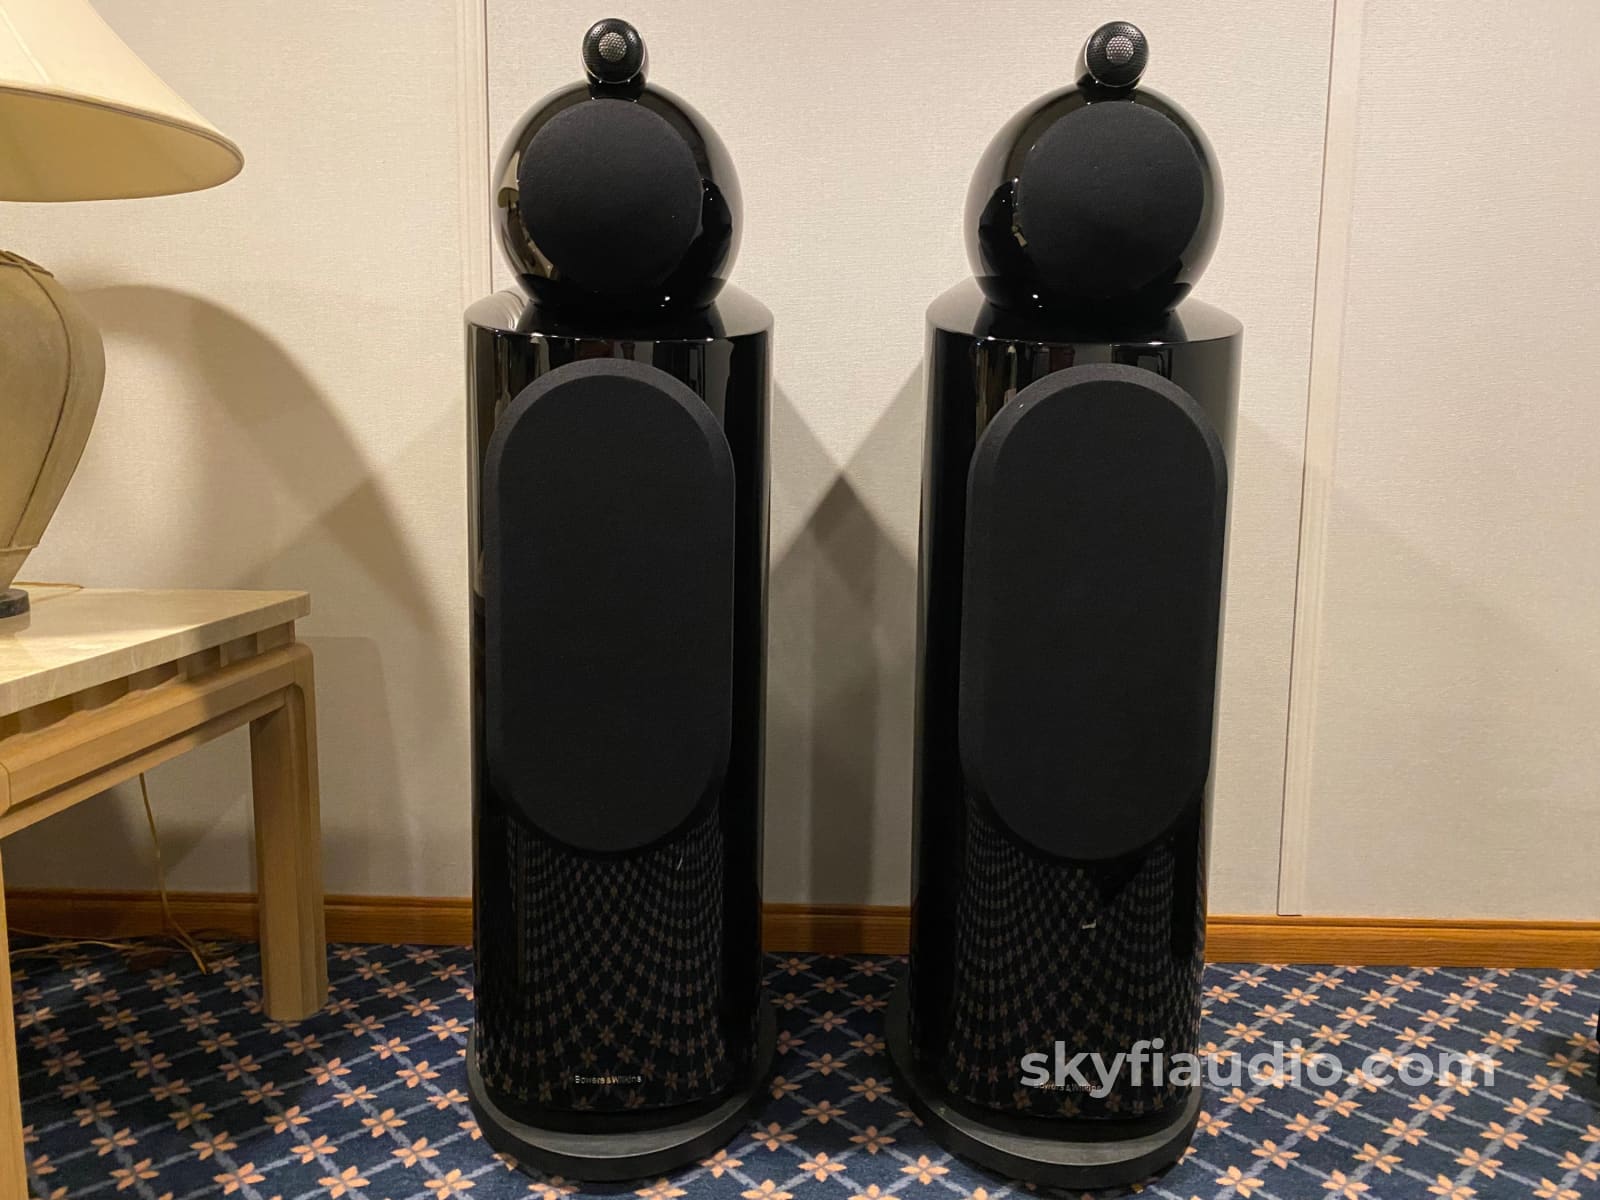 Bowers & Wilkins 802 D3 Speakers In Gloss Black- Like New And Complete